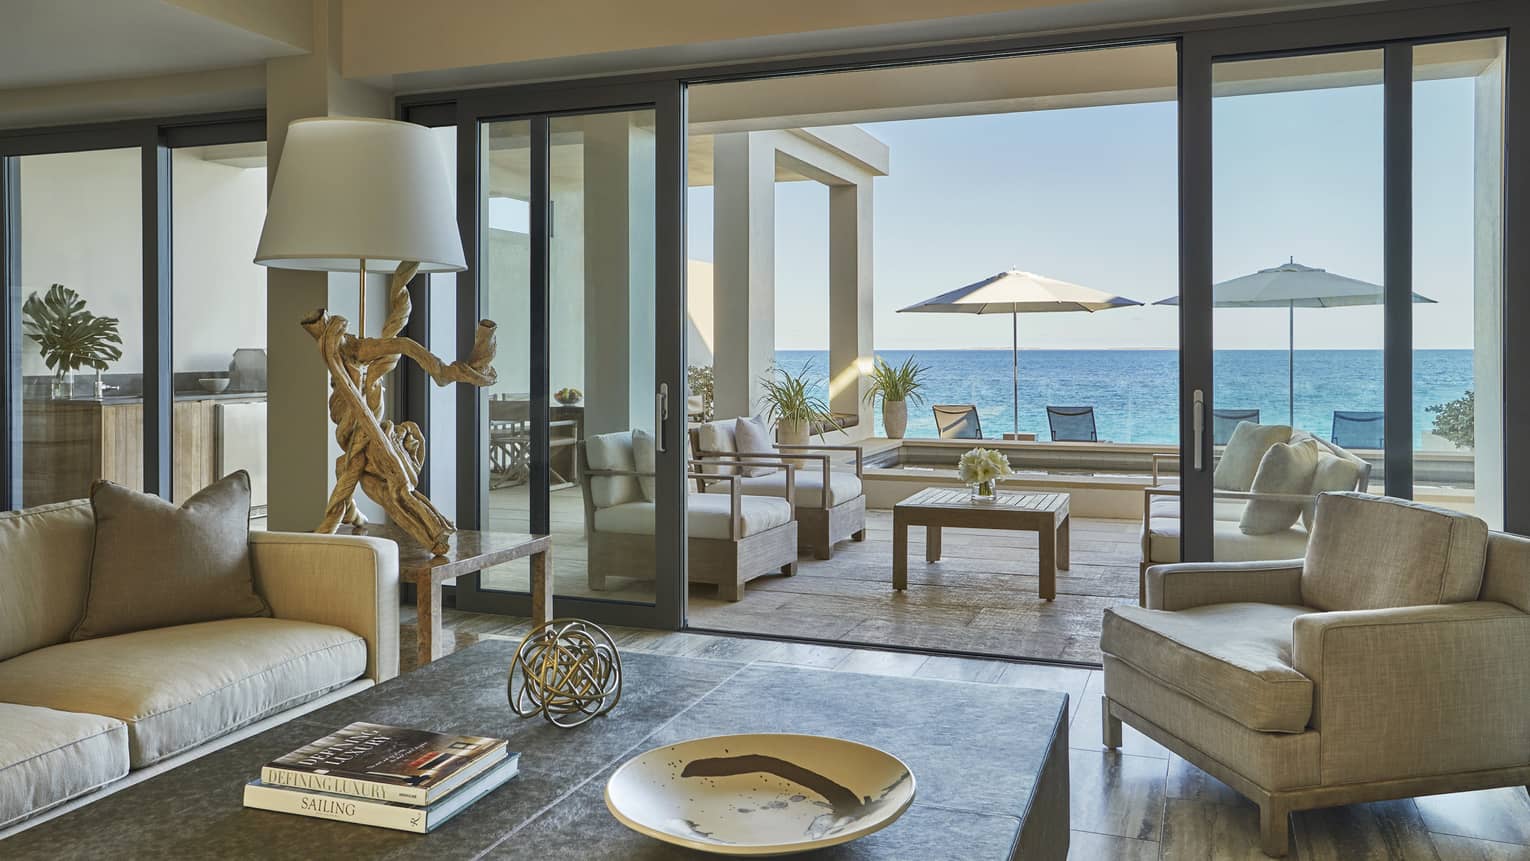 View from inside to indoor-outdoor living rooms with sofas, chairs, patio umbrellas and ocean in background